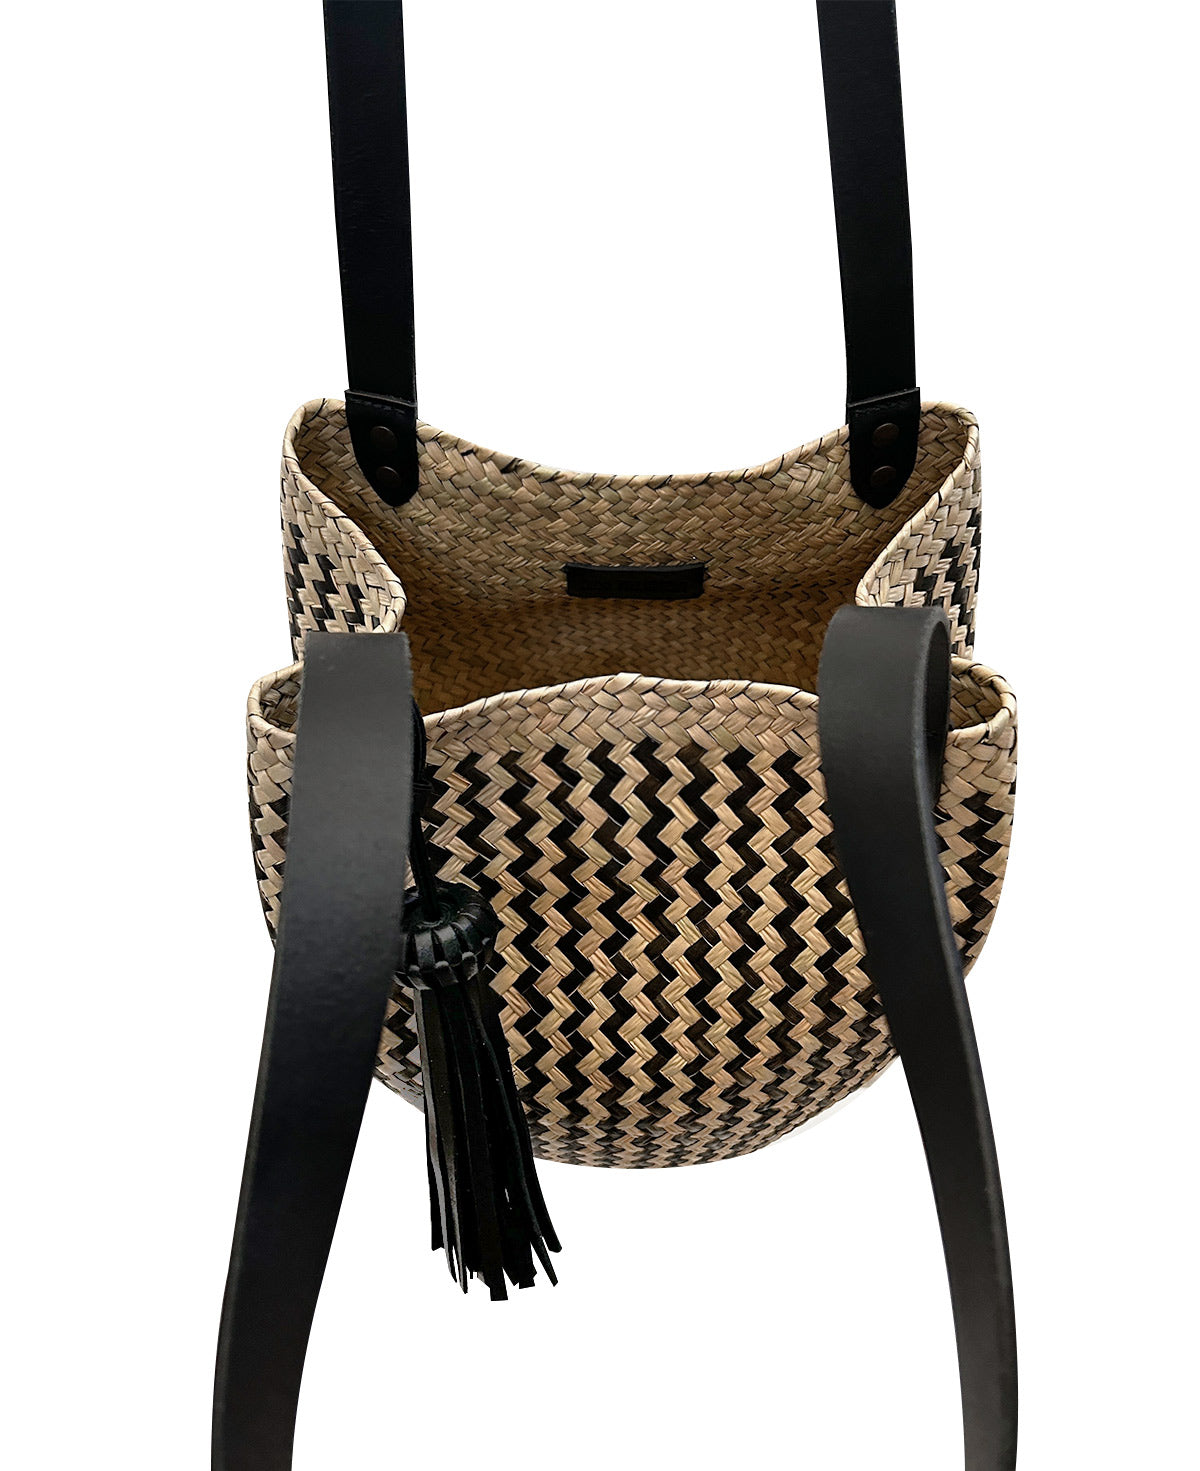 Products Lolita black leather bucket bag / black zigzag hand woven palm